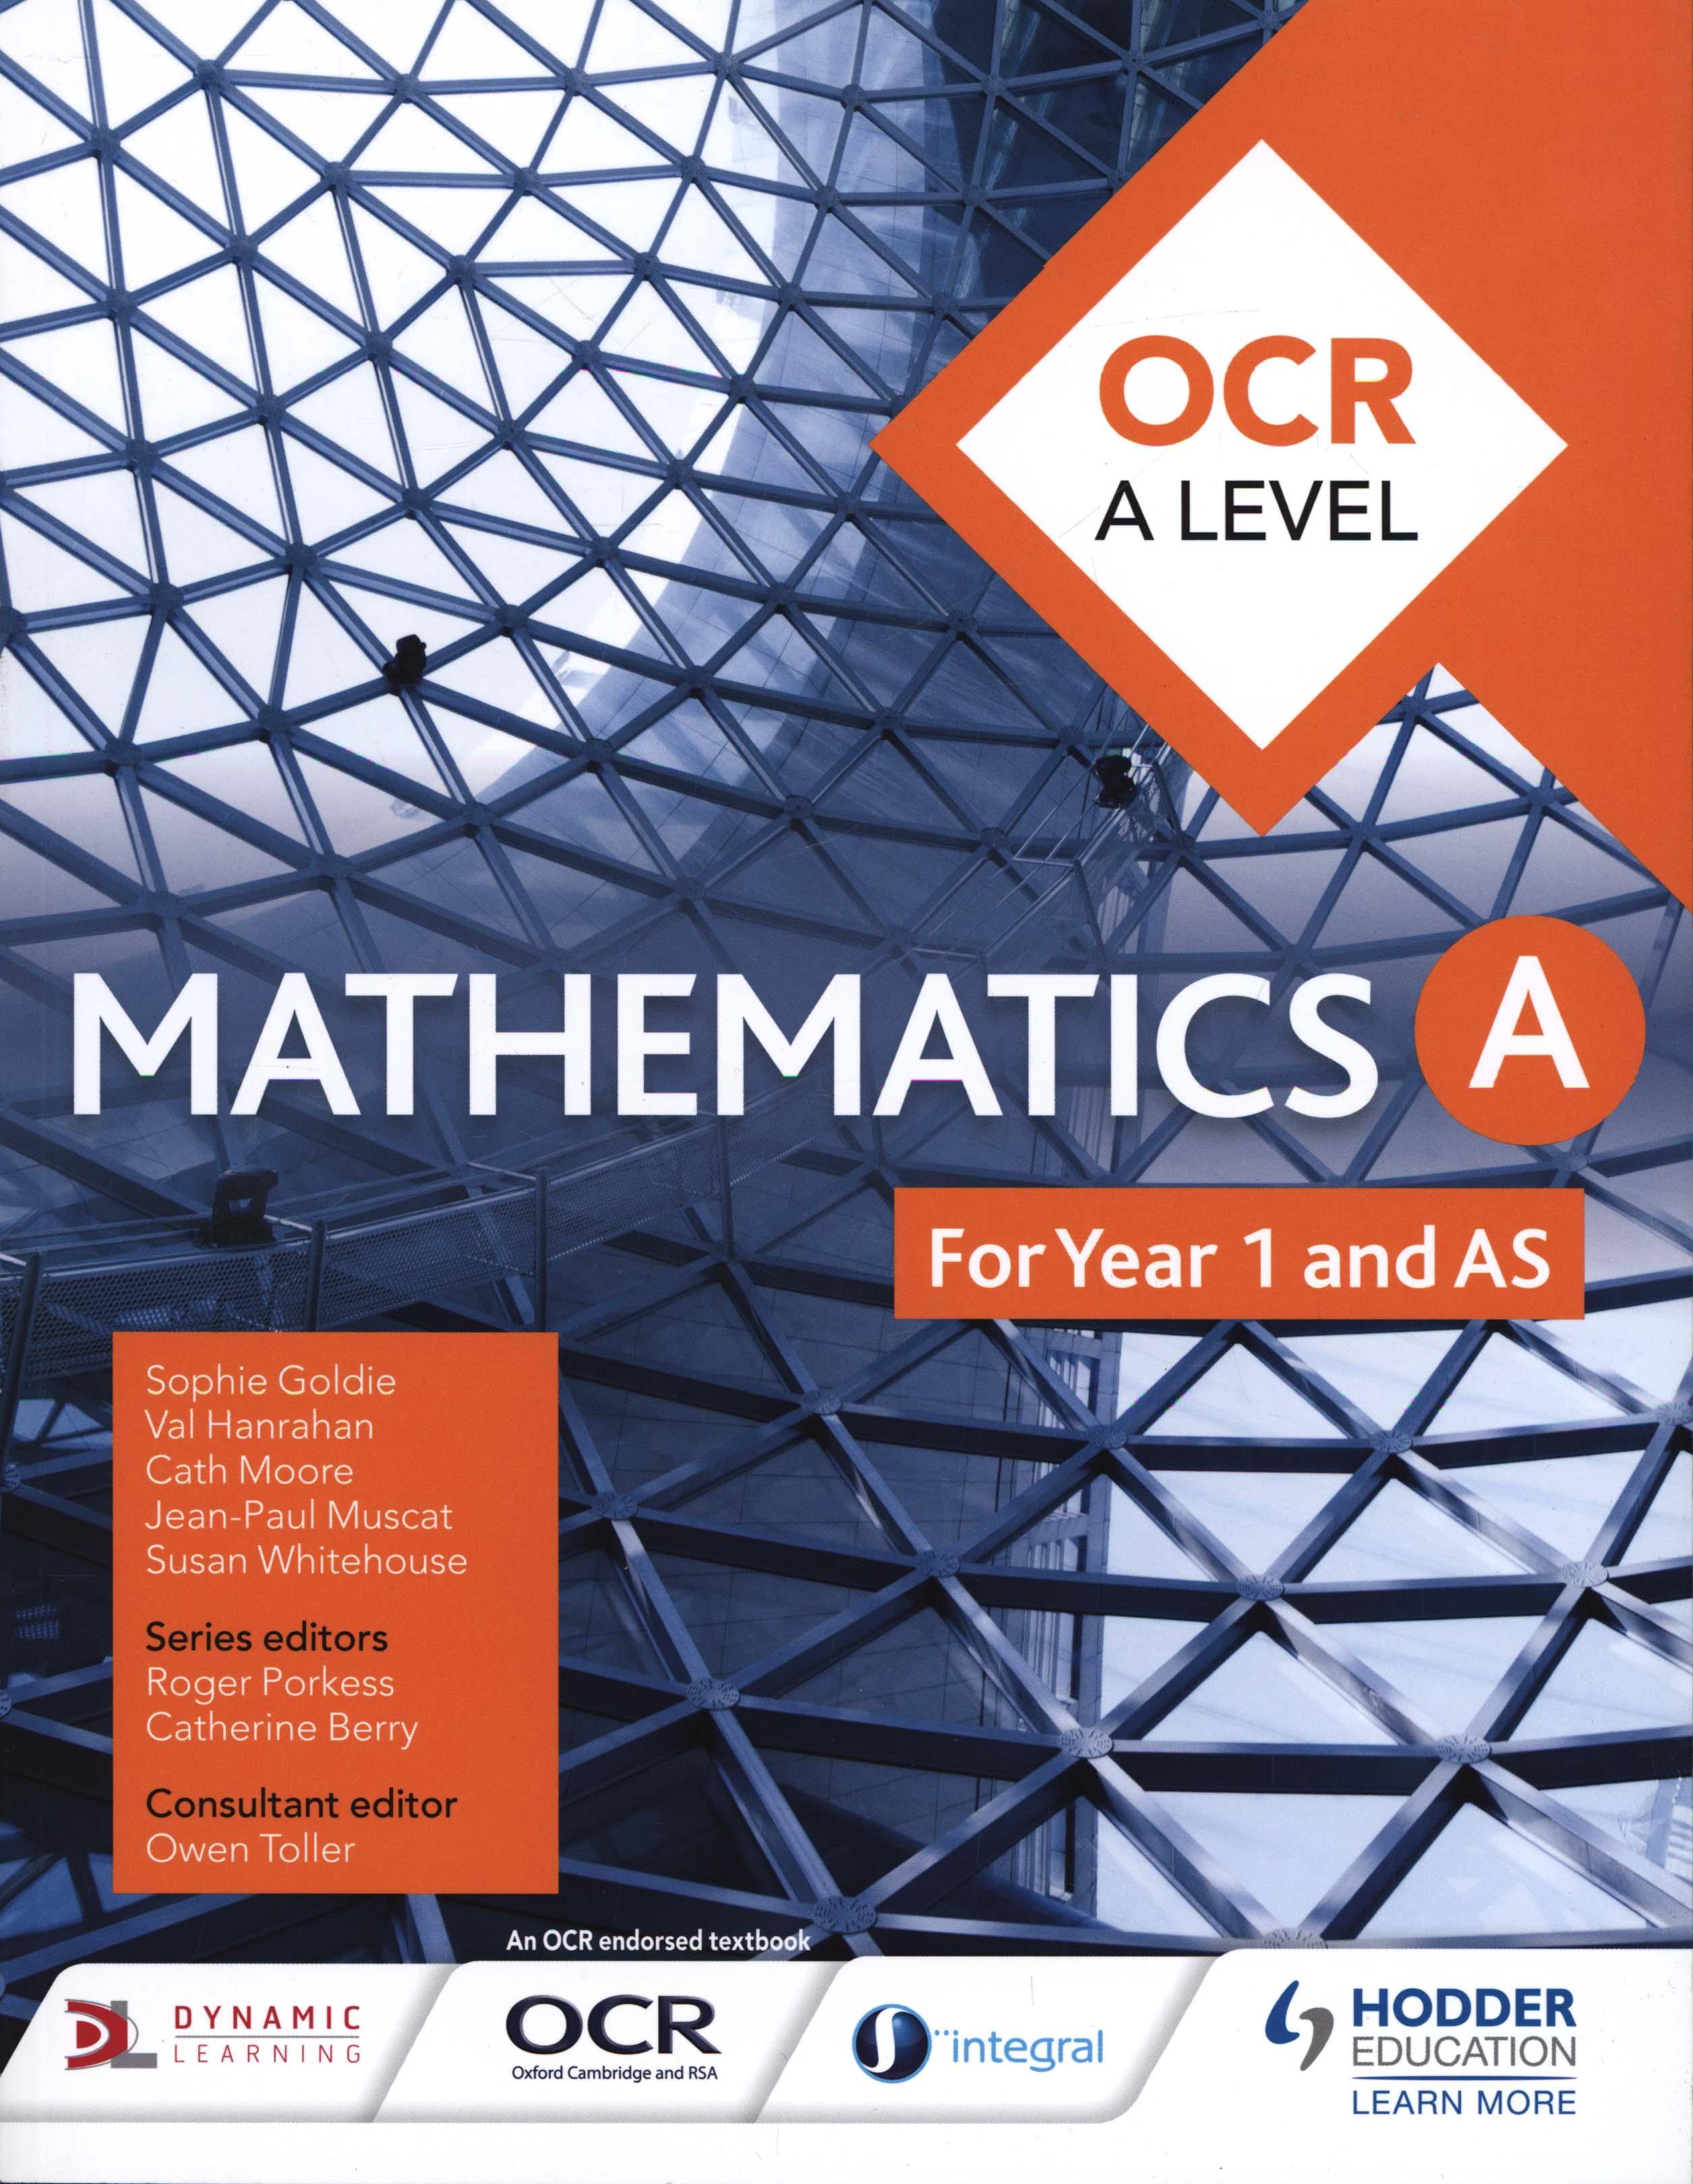 OCR A Level Mathematics Year 1 (AS) - Sophie Goldie